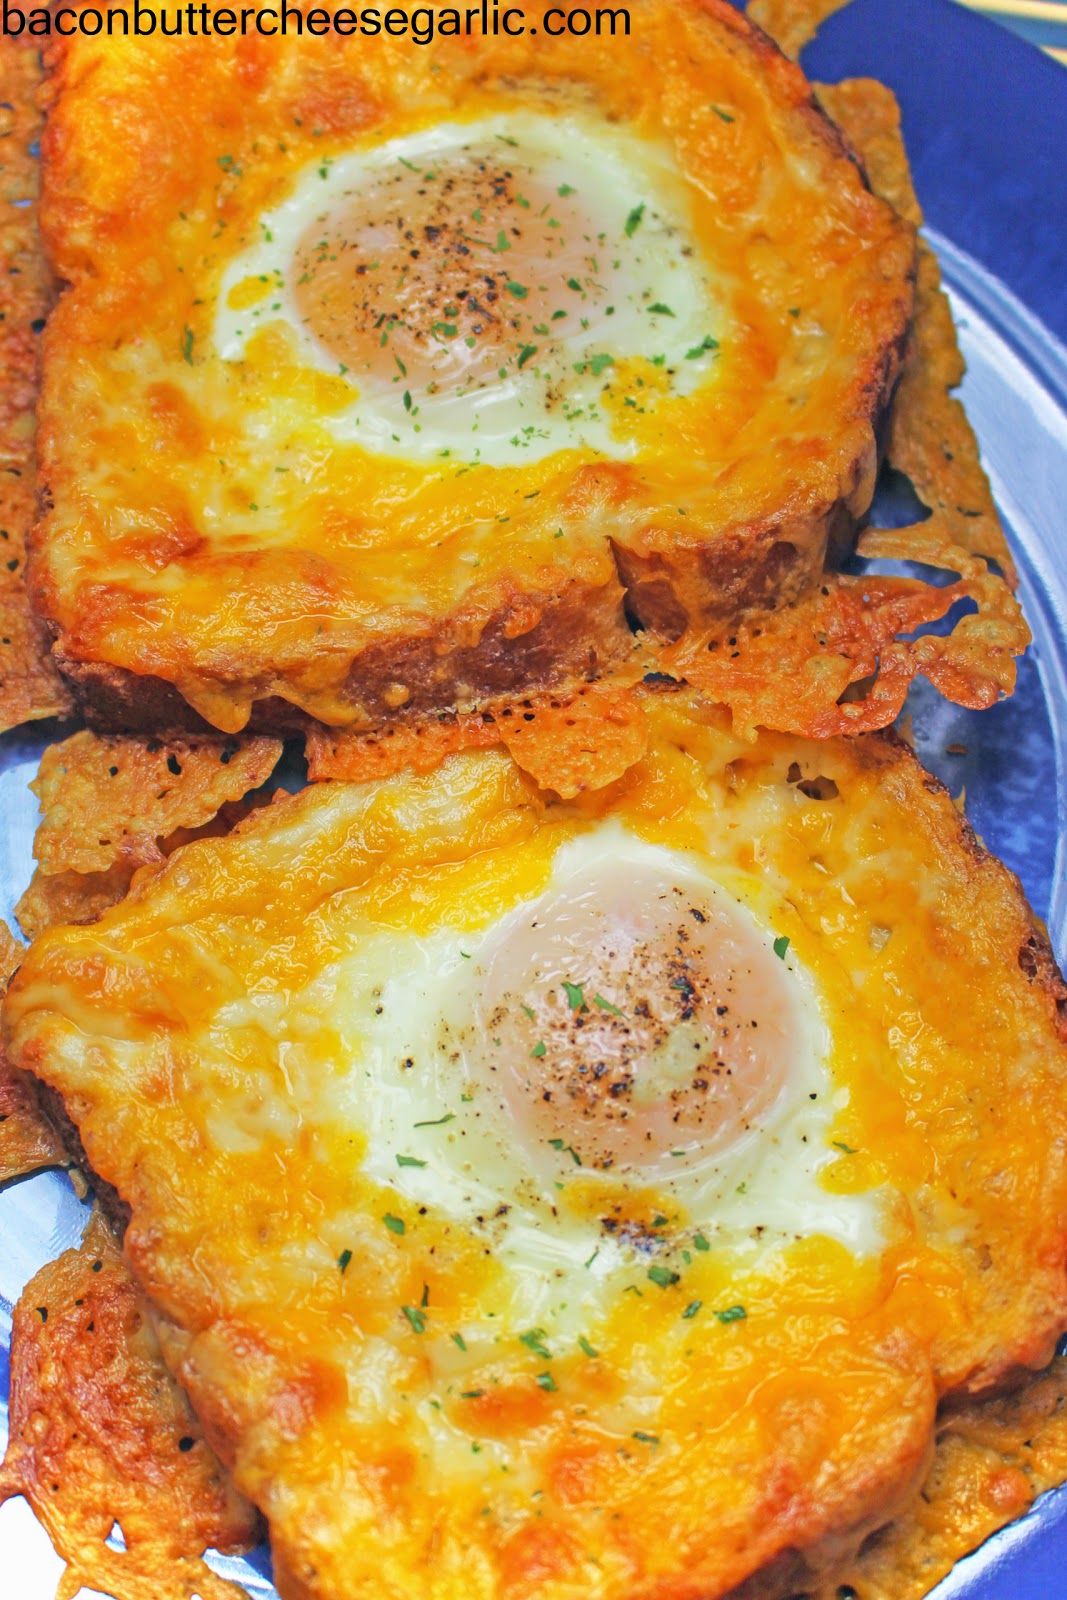 Bacon, Butter, Cheese &amp; Garlic: Cheesy Egg Toasts